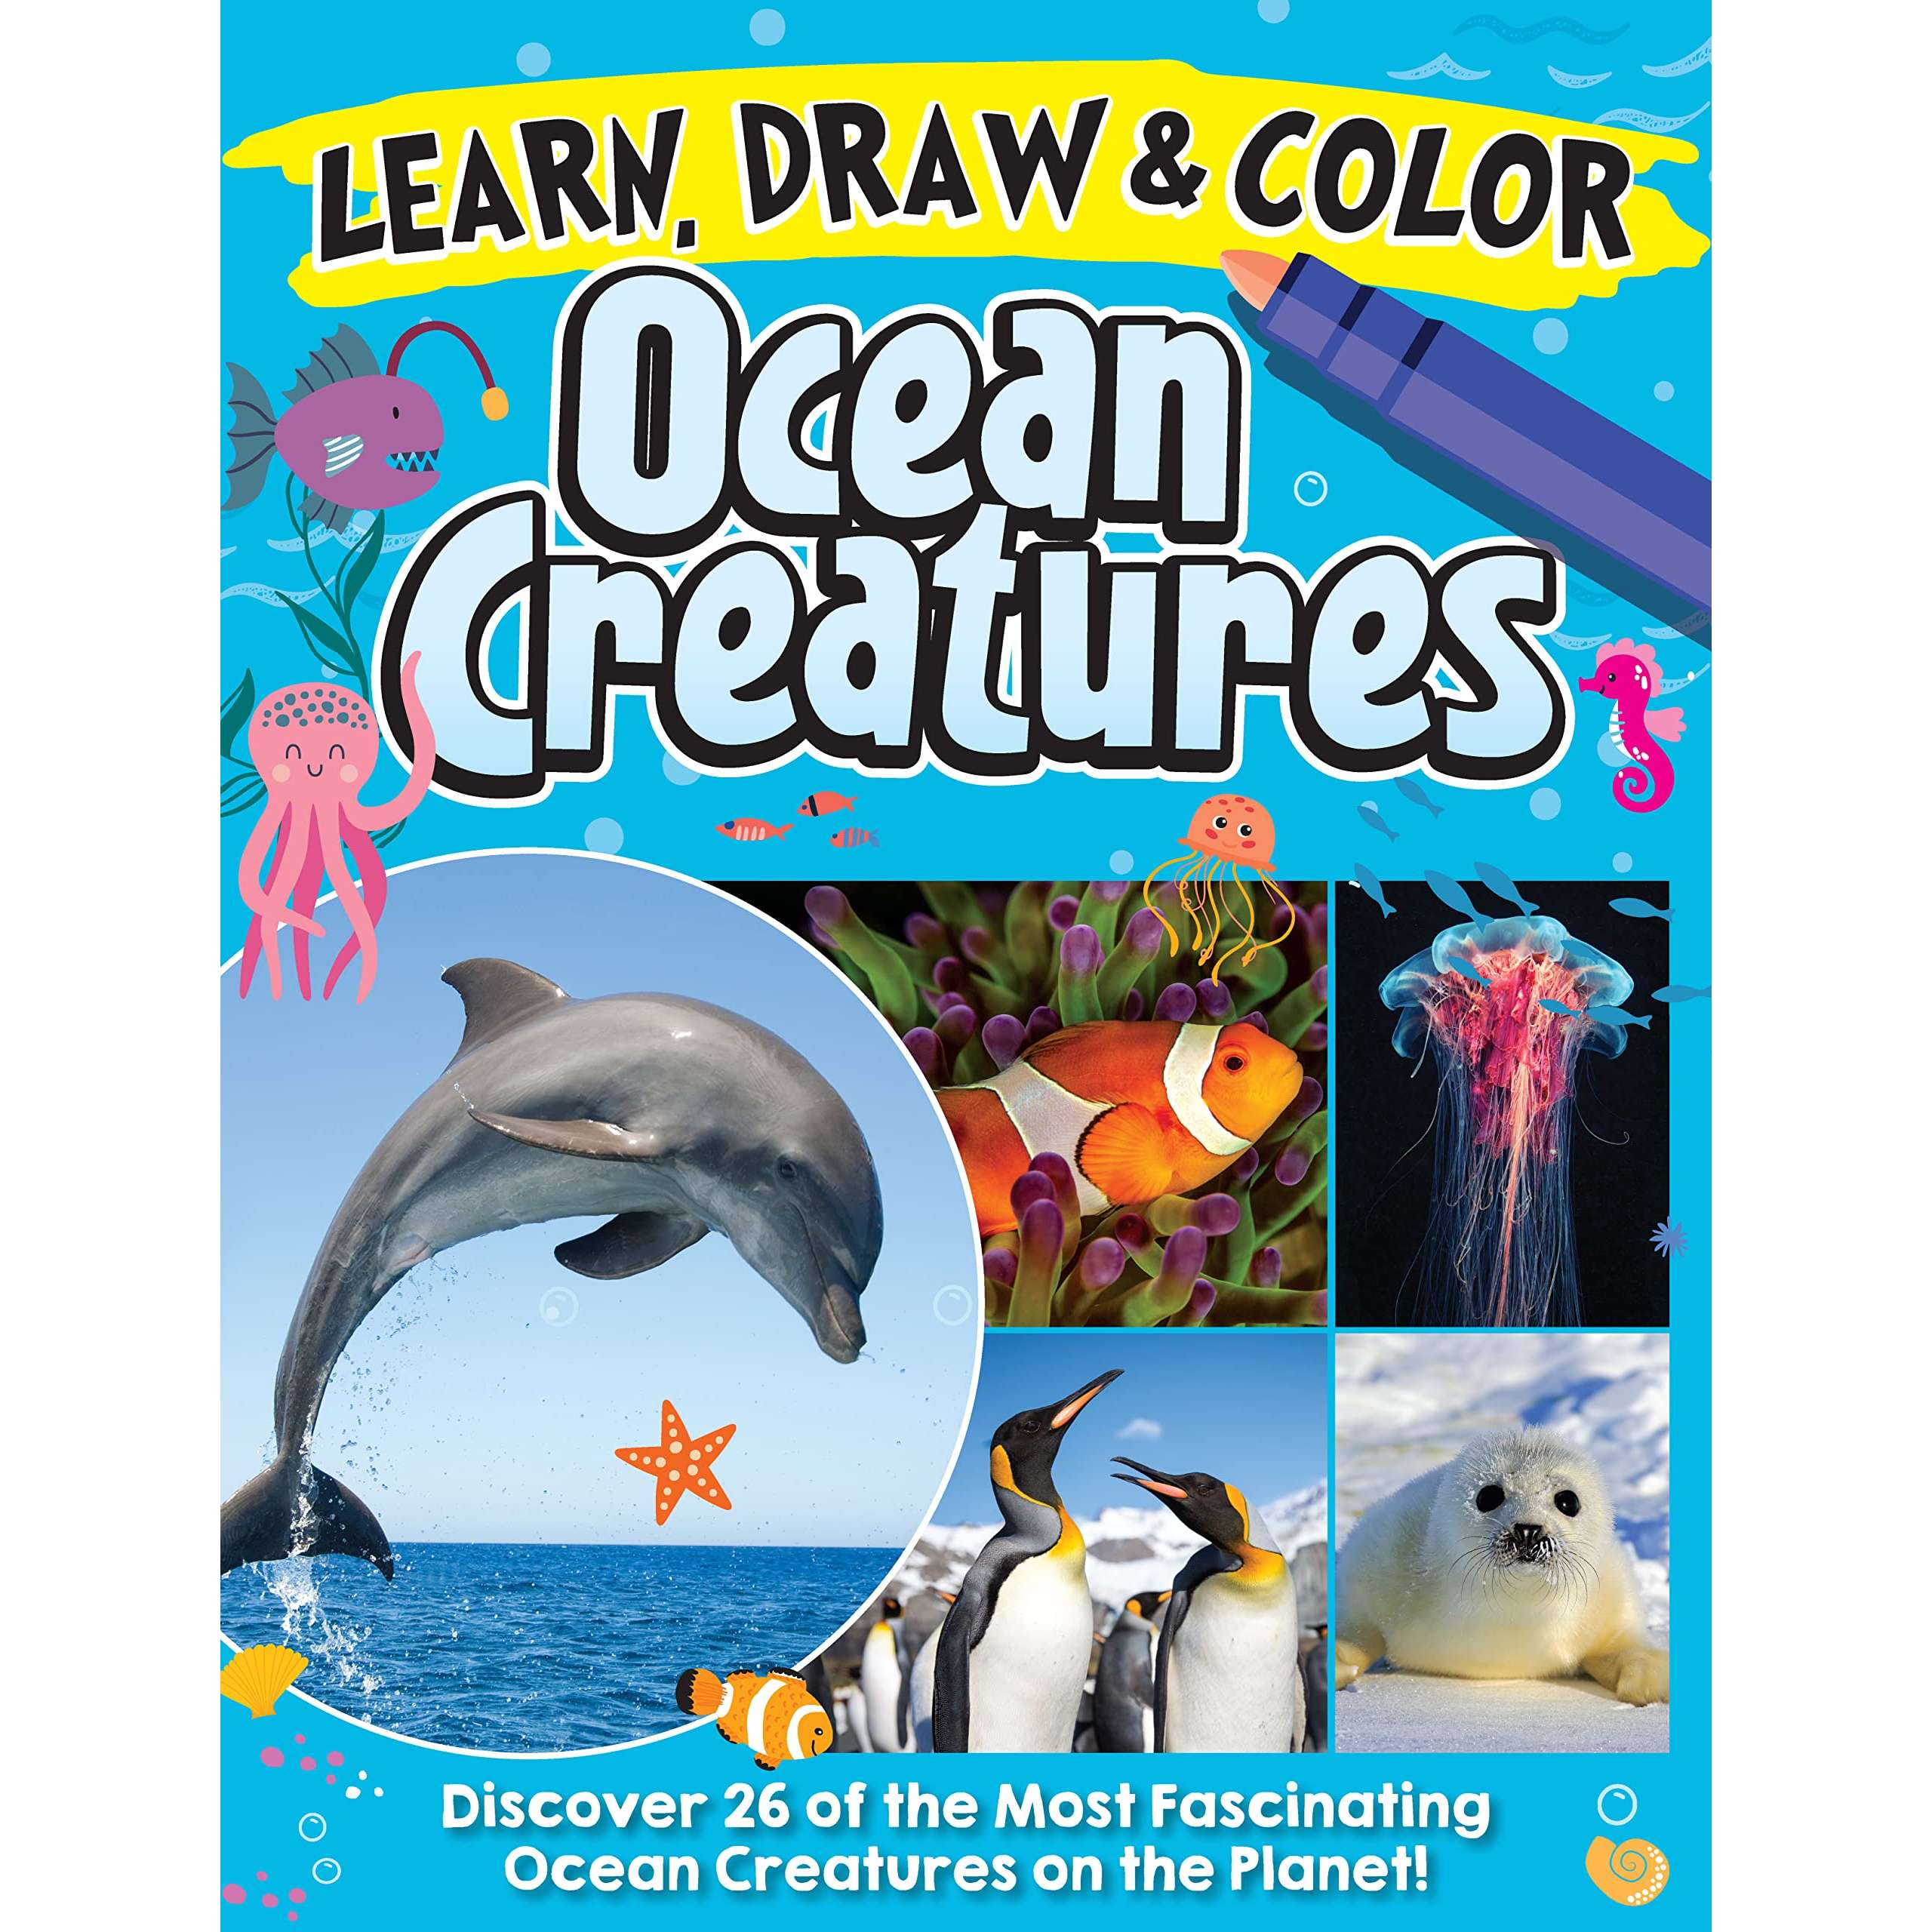 Under the Sea: How to Draw Books for Kids with Dolphins, Mermaids, and Ocean Animals [Book]